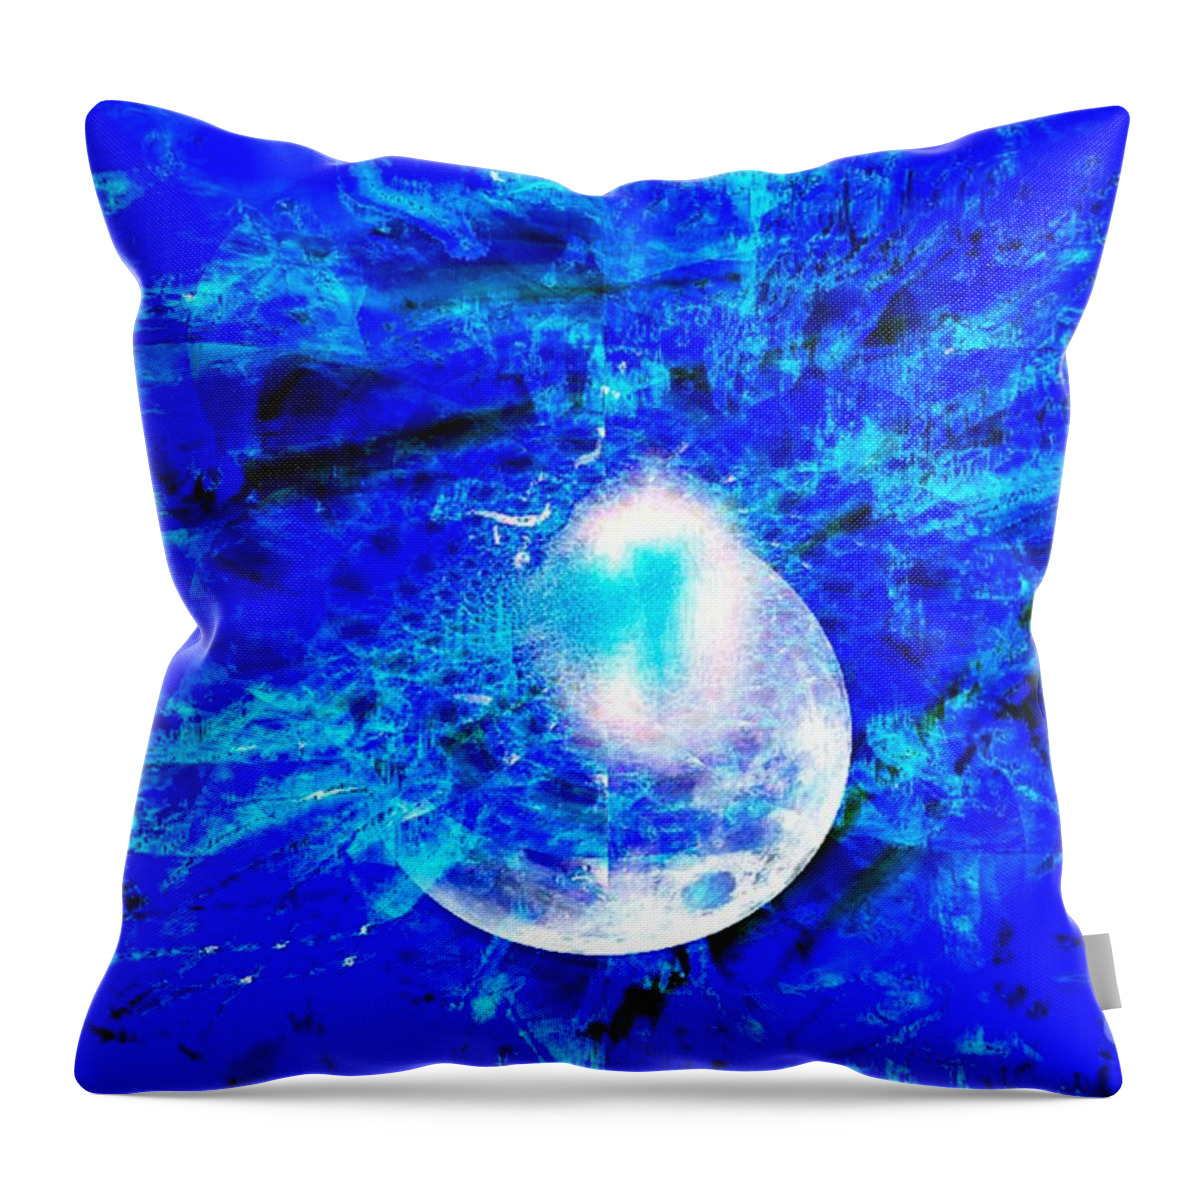 Fania Simon Throw Pillow featuring the digital art Prophecy - The Second Coming of the Lord by Fania Simon